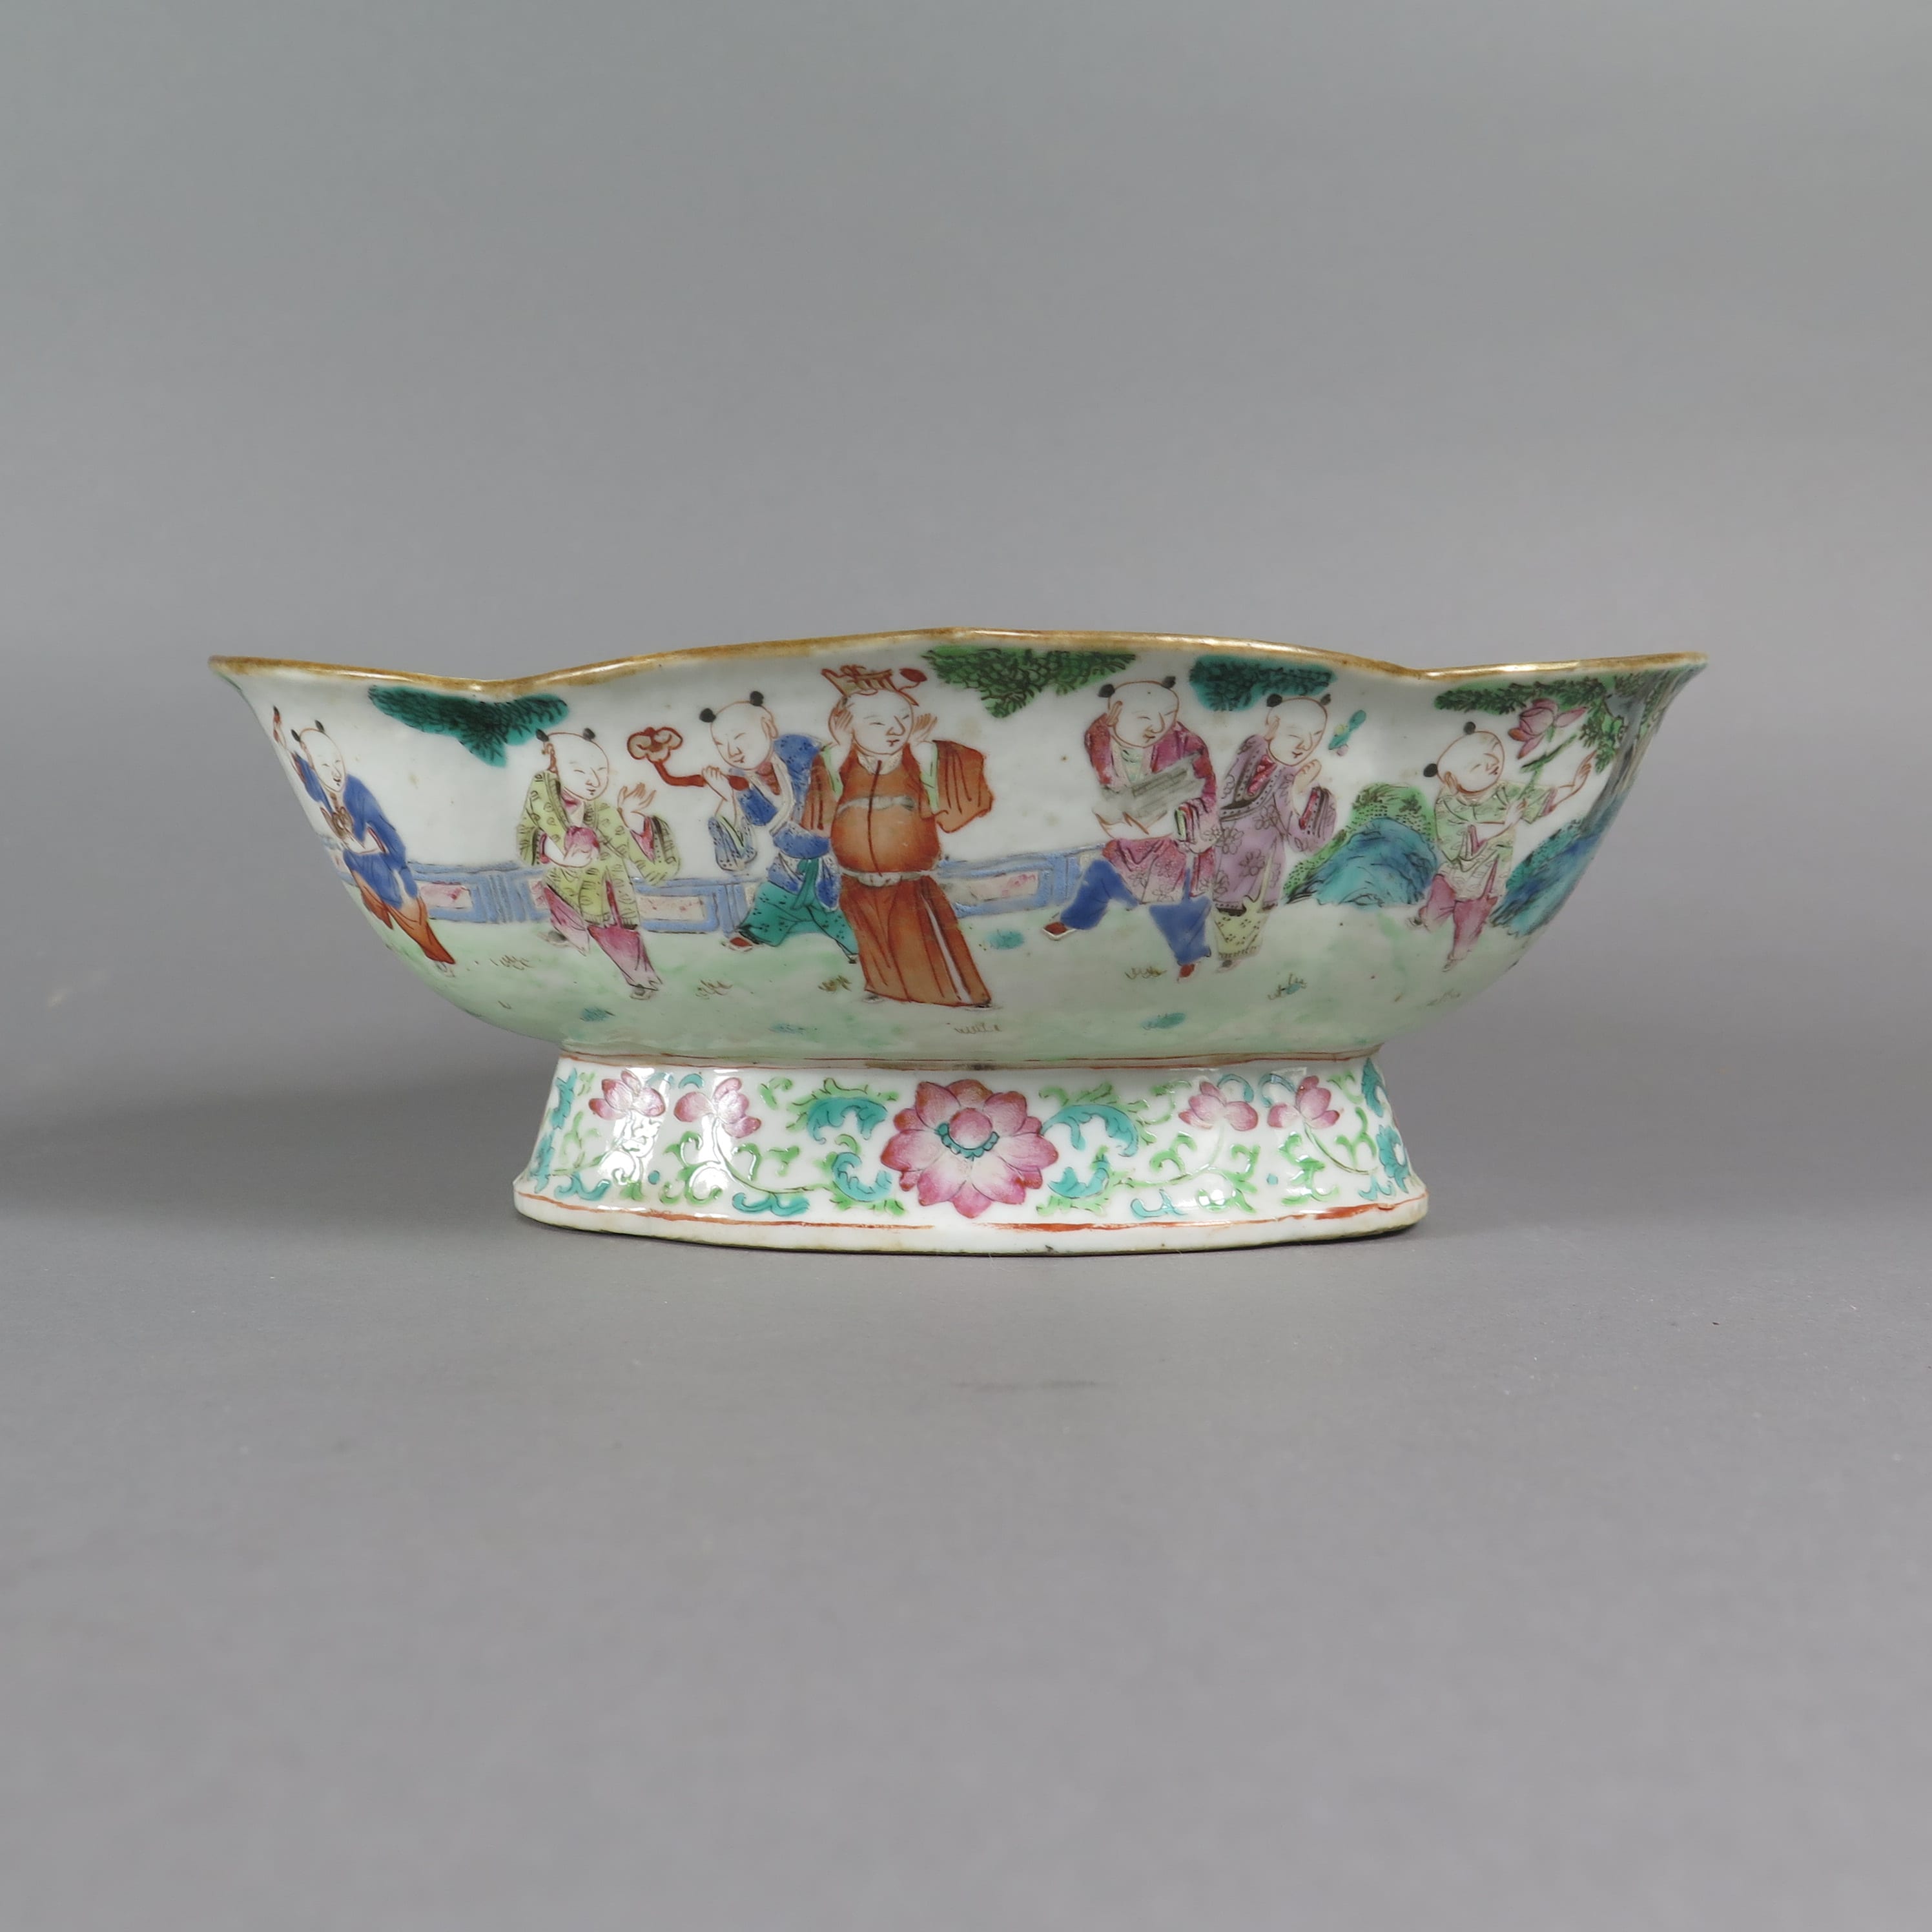 Lot 248: Chinese Guangxu Porcelain Footed Compote